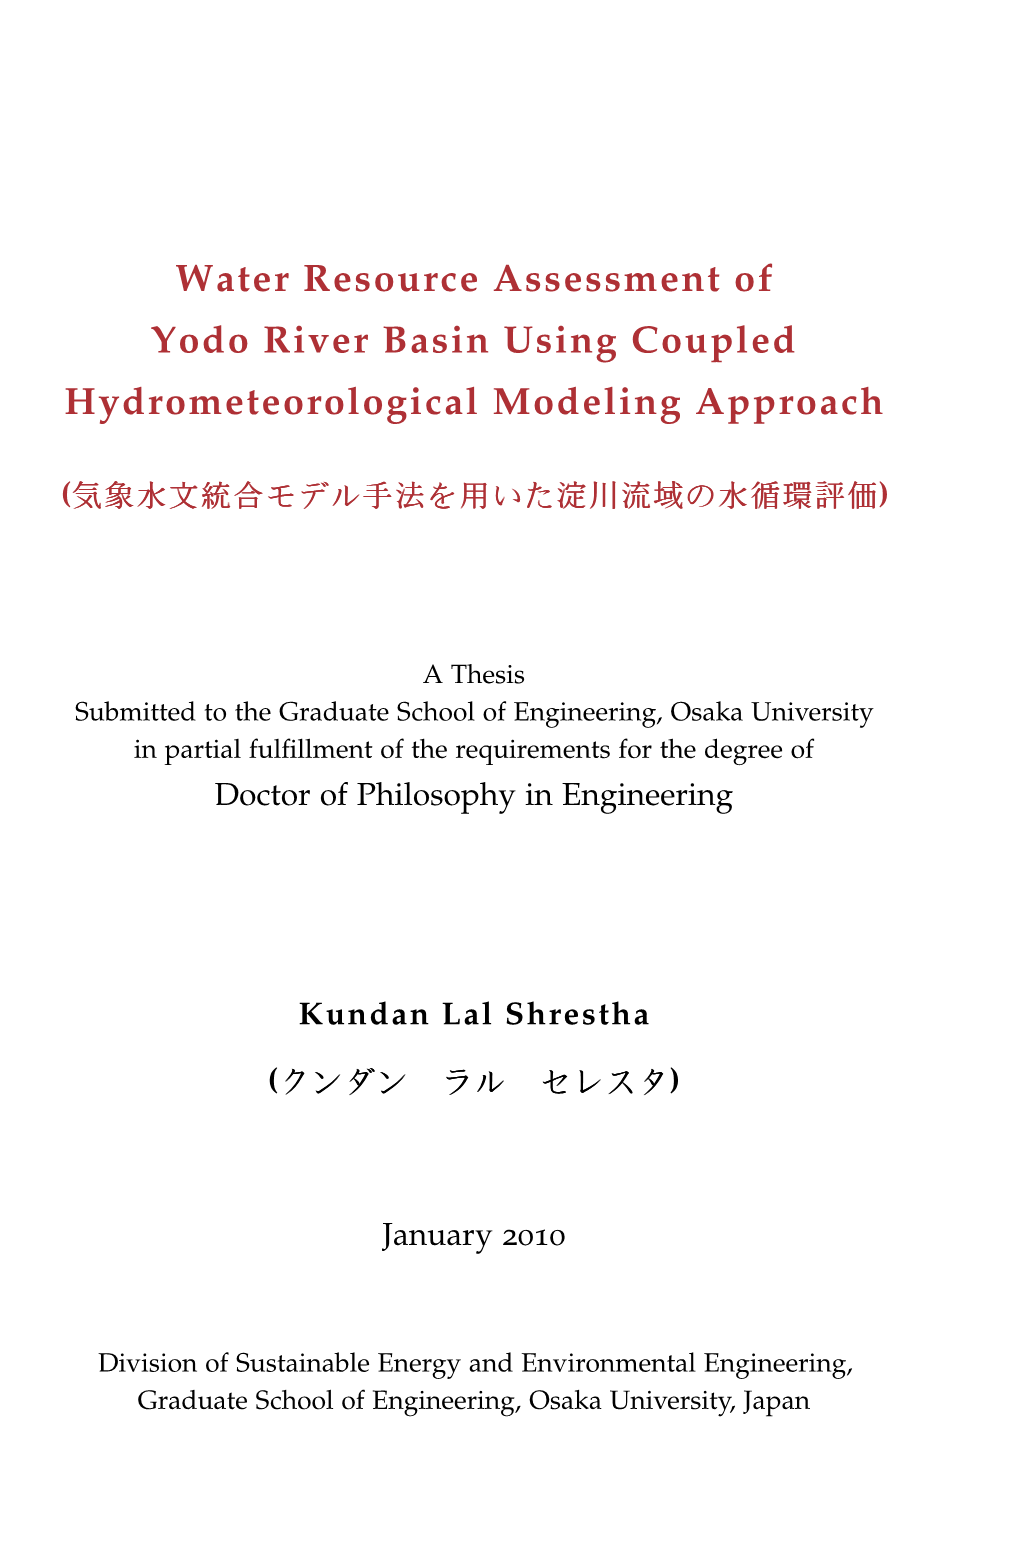 Water Resource Assessment of Yodo River Basin Using Coupled Hydrometeorological Modeling Approach